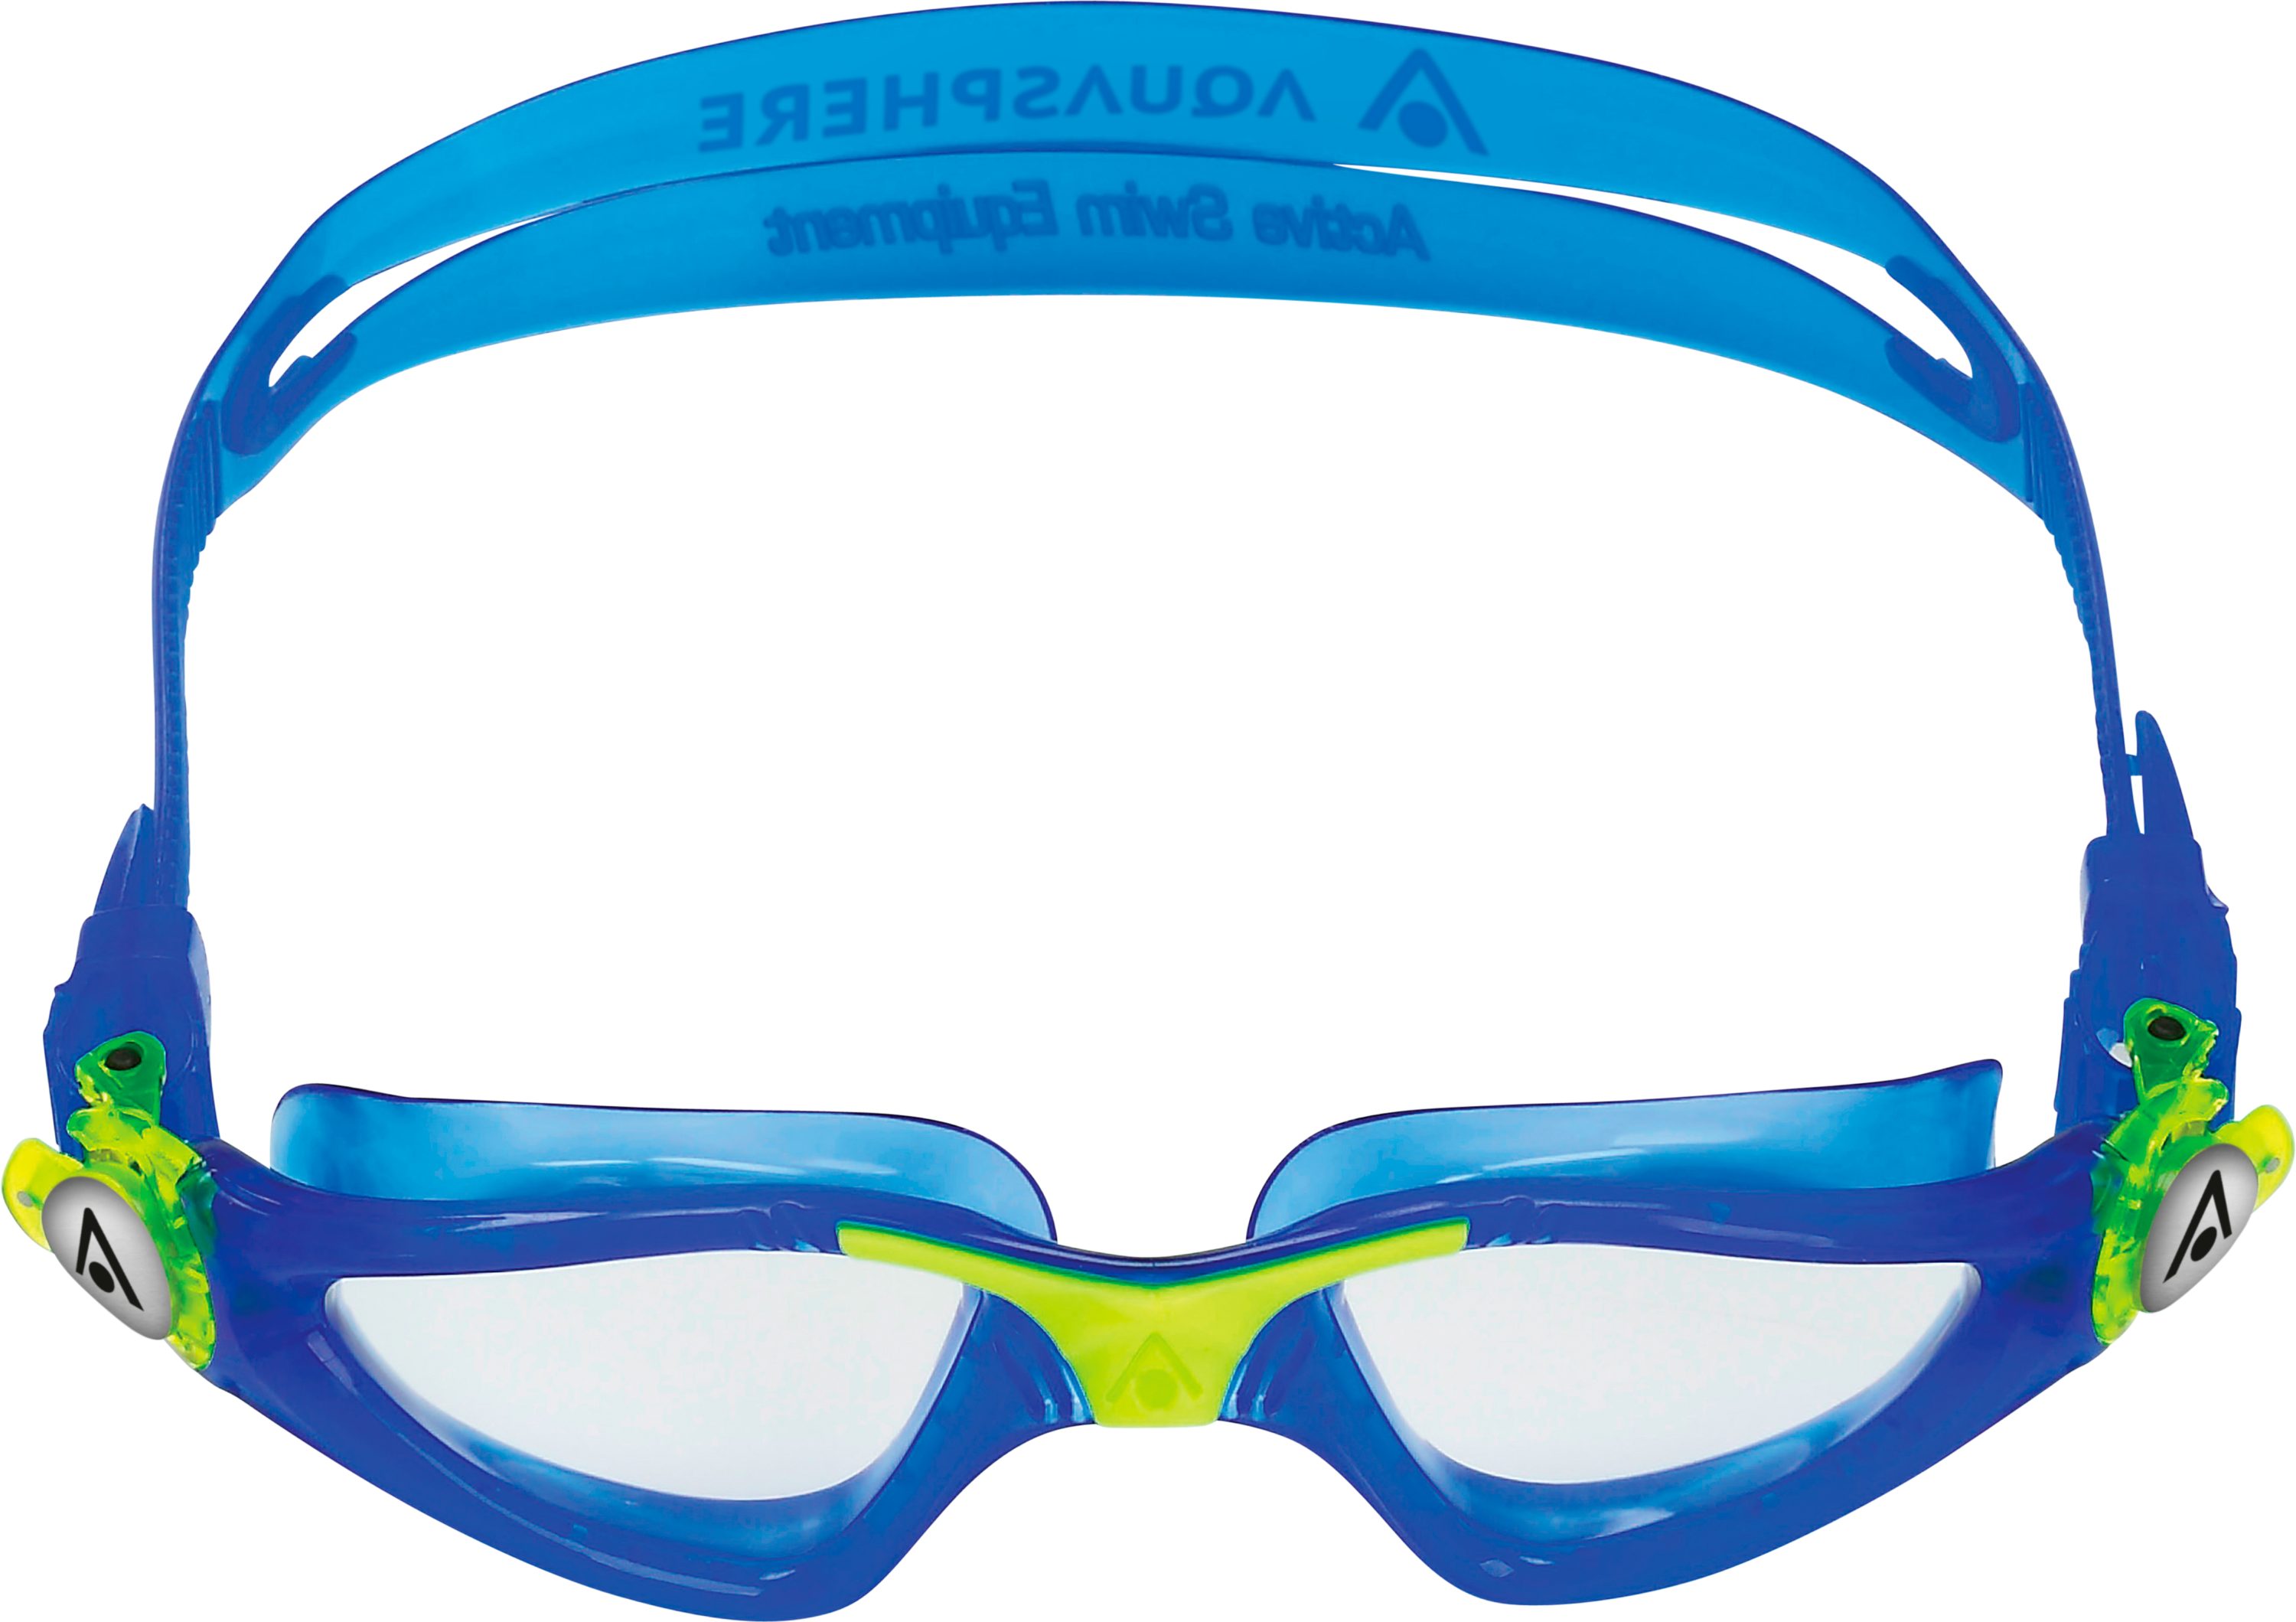 Aquasphere Schwimmbrille Aquasphere Kayenne Kinder Schwimmbrille 4007LC BLUE YELLOW LENS CLEAR